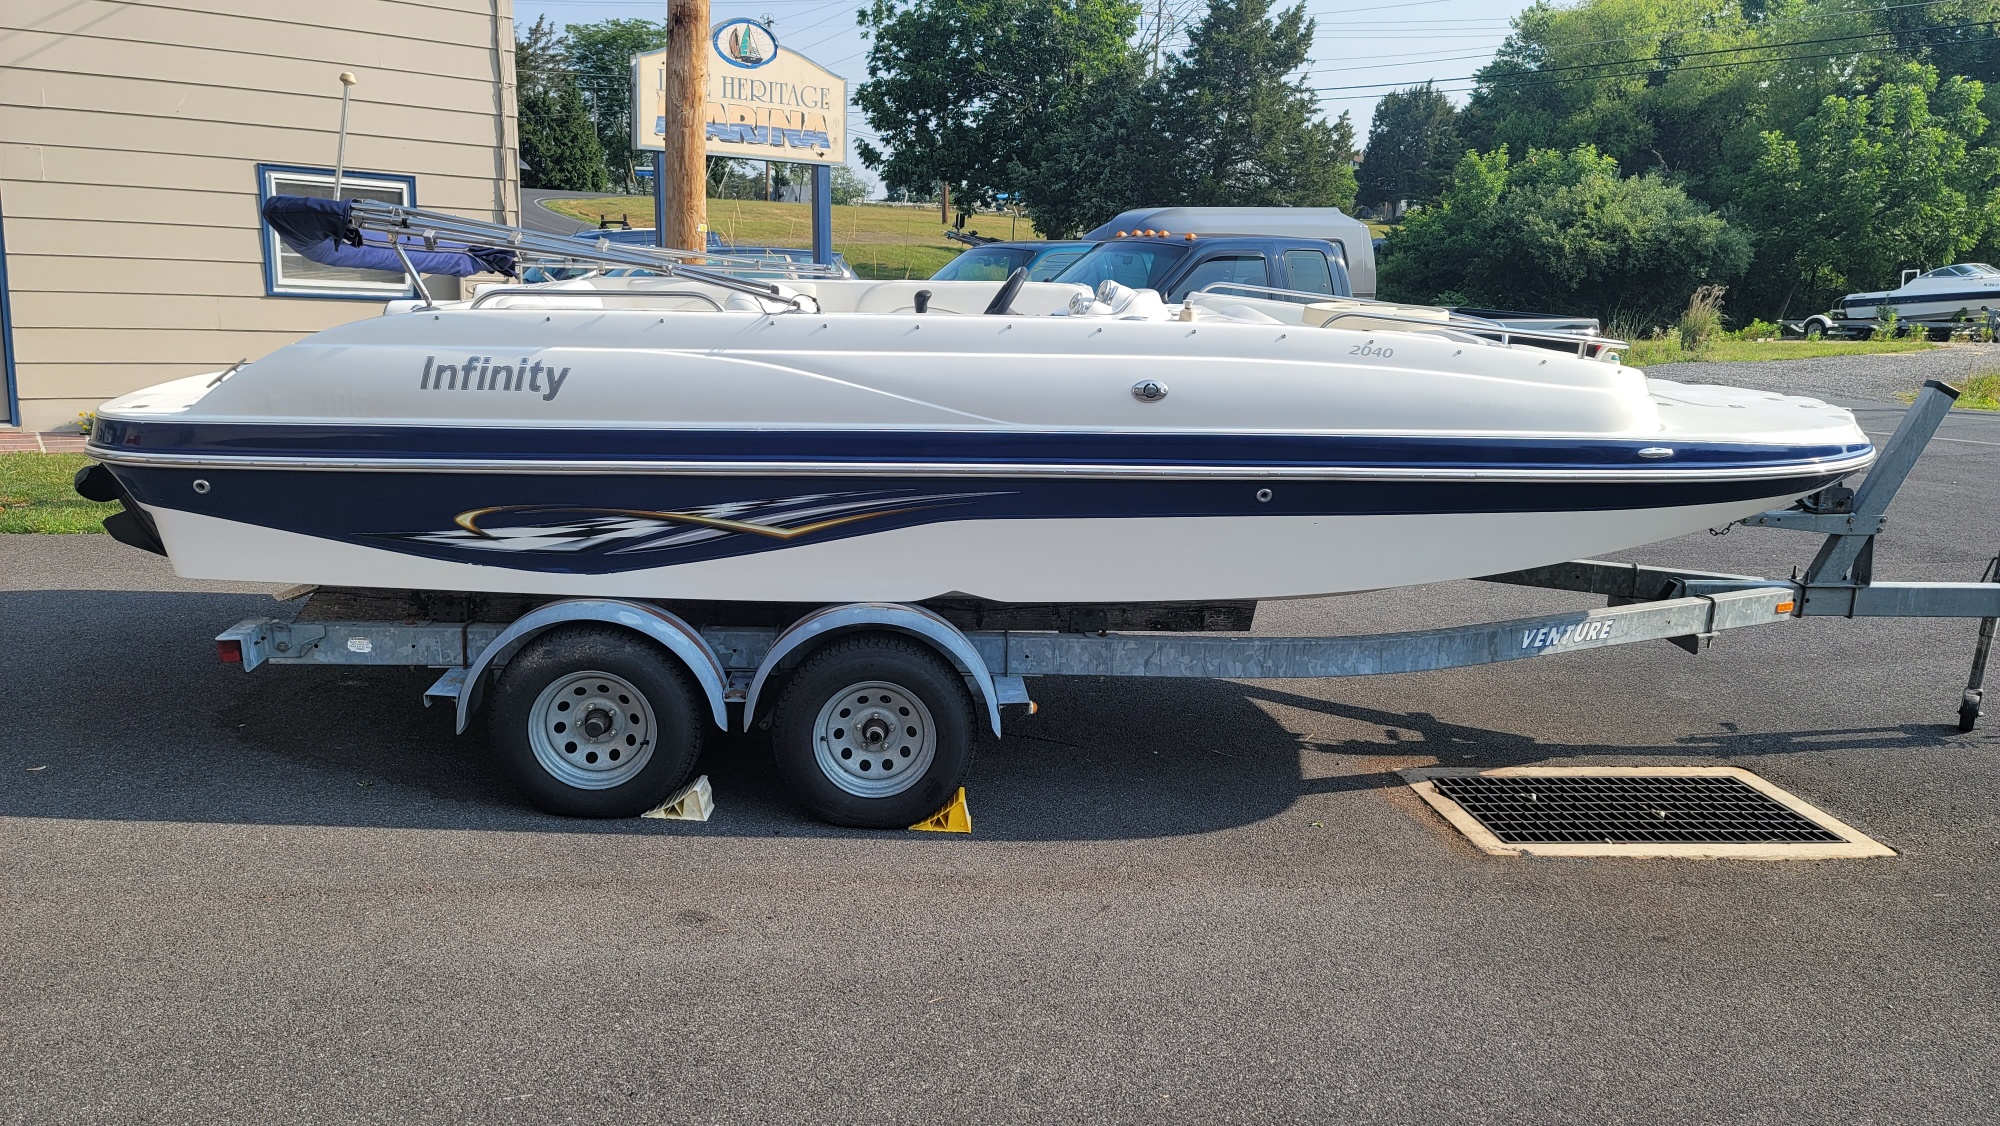 SOLD 2004 INFINITY 2040 DECK BOAT